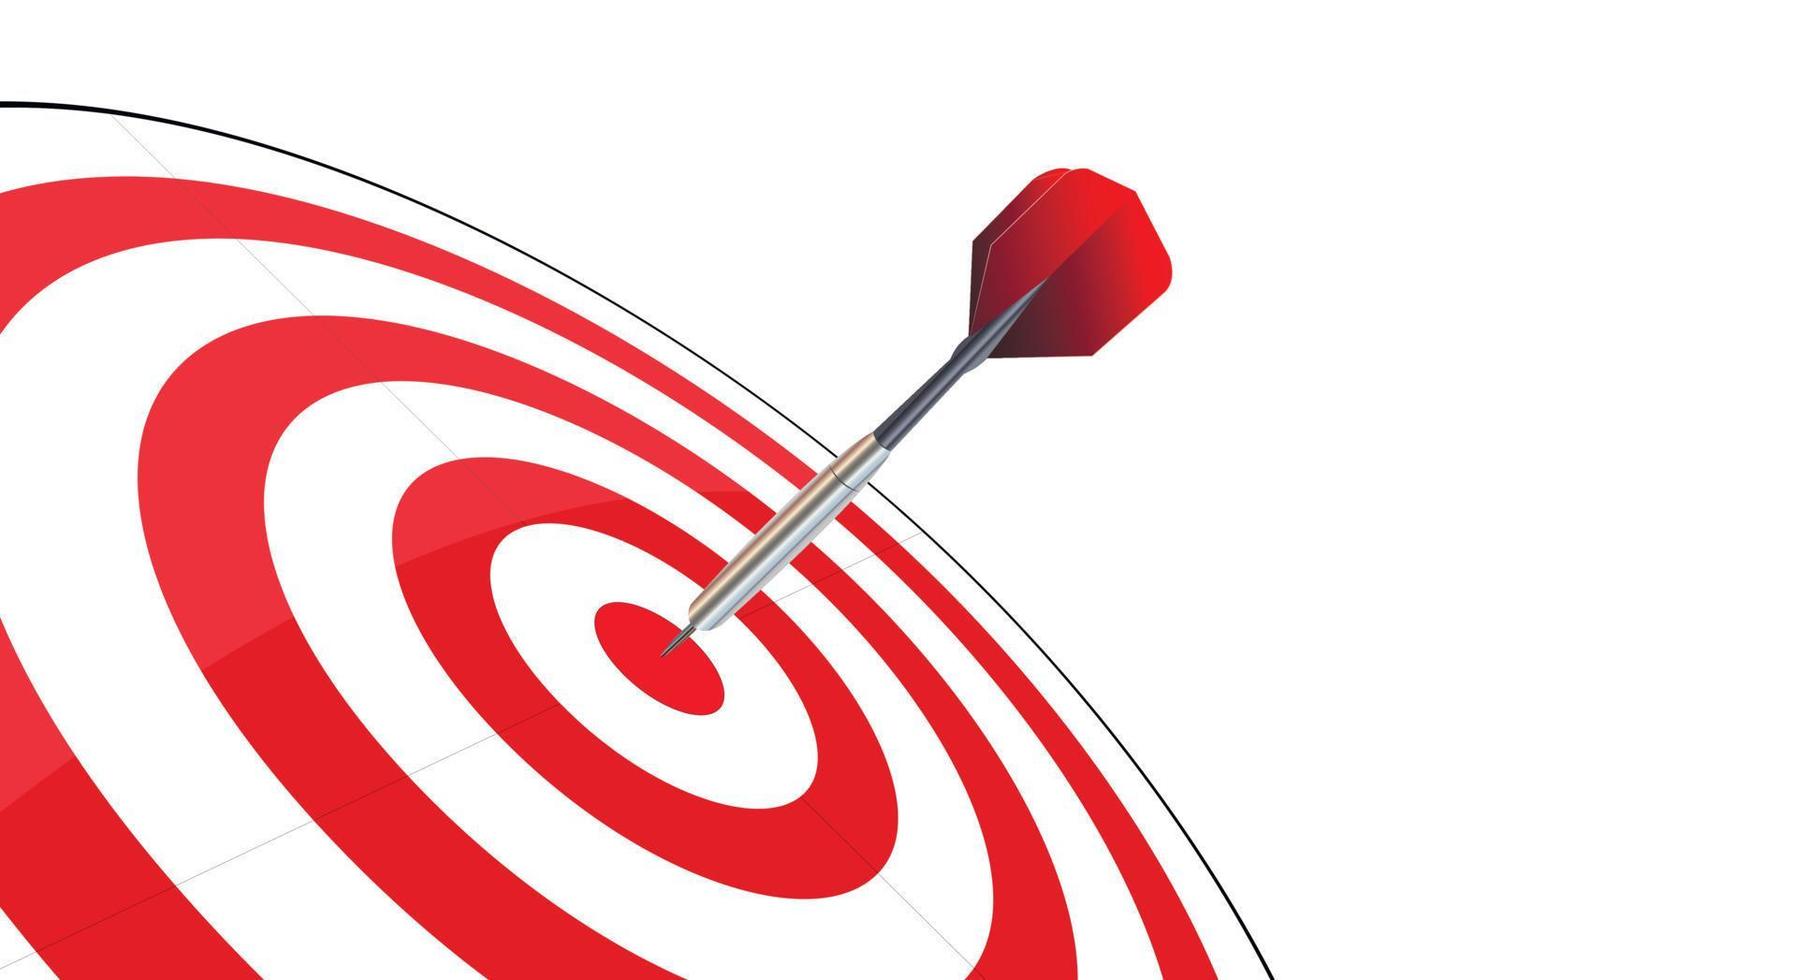 https://static.vecteezy.com/system/resources/previews/009/329/545/non_2x/target-darts-success-business-concept-creative-idea-on-a-white-background-copy-space-illustration-vector.jpg